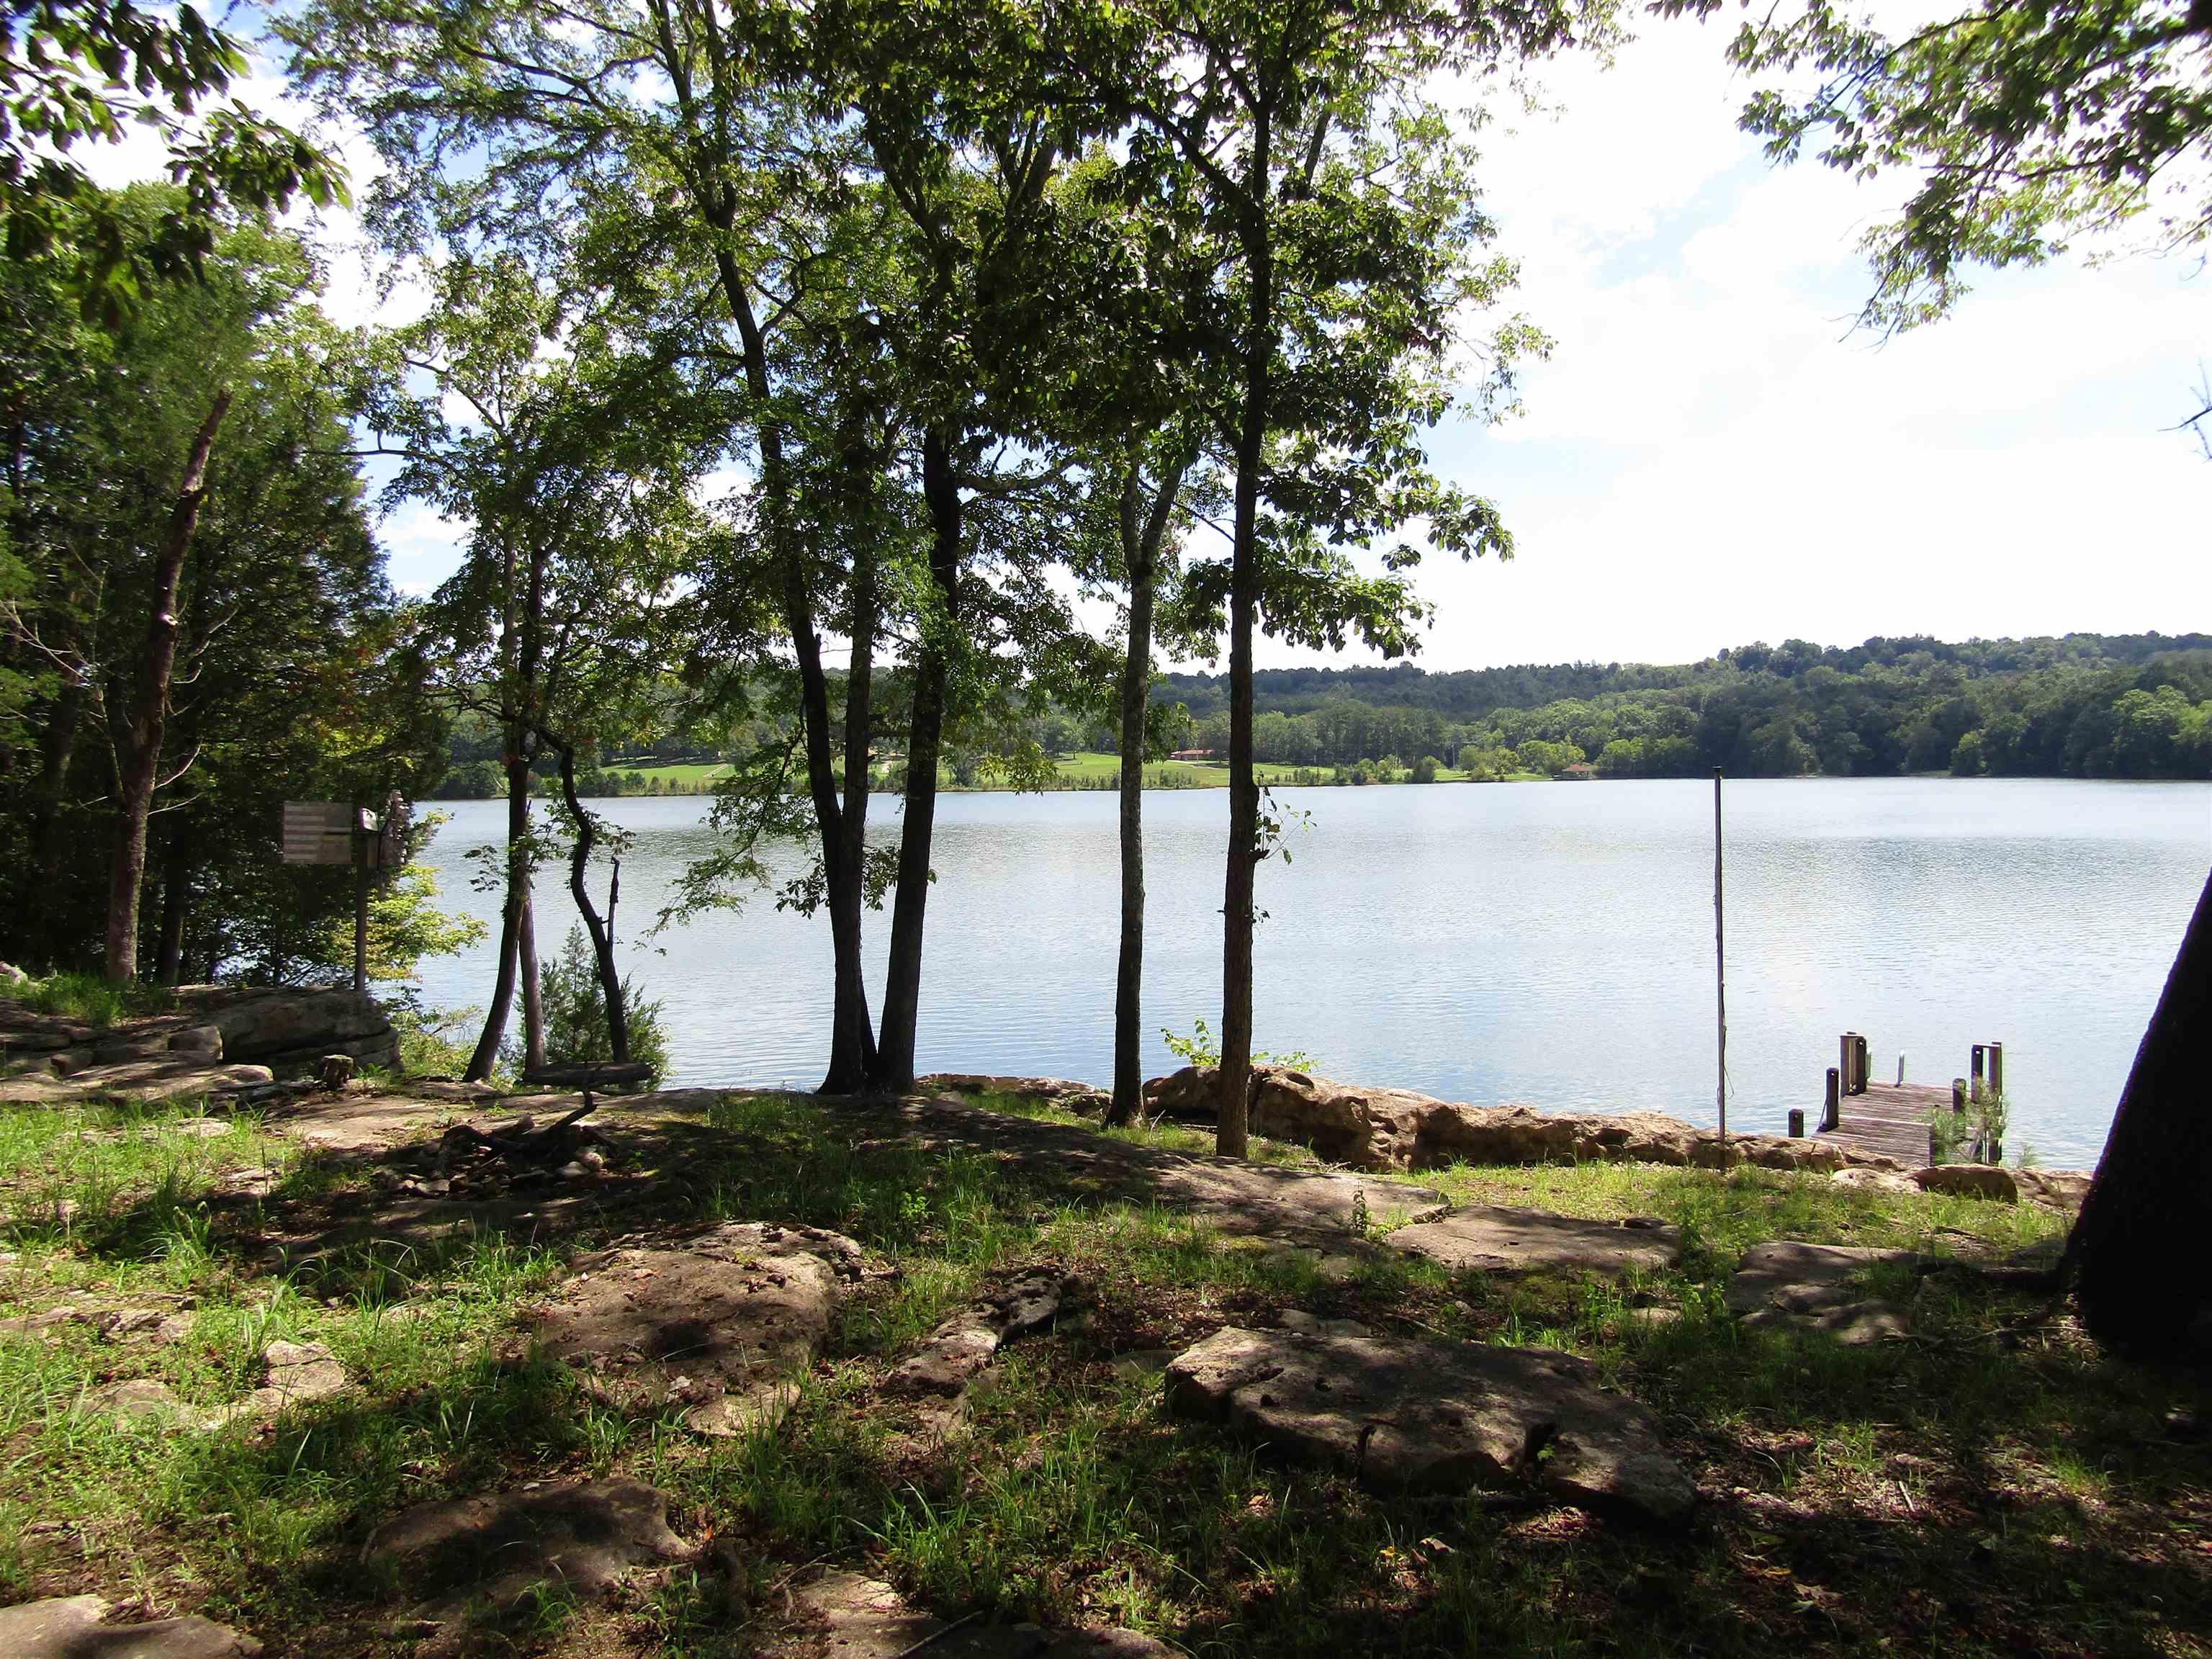 What a view! This 2 bedroom/1bath home located on Cedar Creek Lake offers breathtaking views for its guest.  A wonderful location that boasts a half acre lot on the main lake with plenty of room for entertaining or enjoying a cup of coffee on the front porch.  TVA restrictions and guidelines apply.